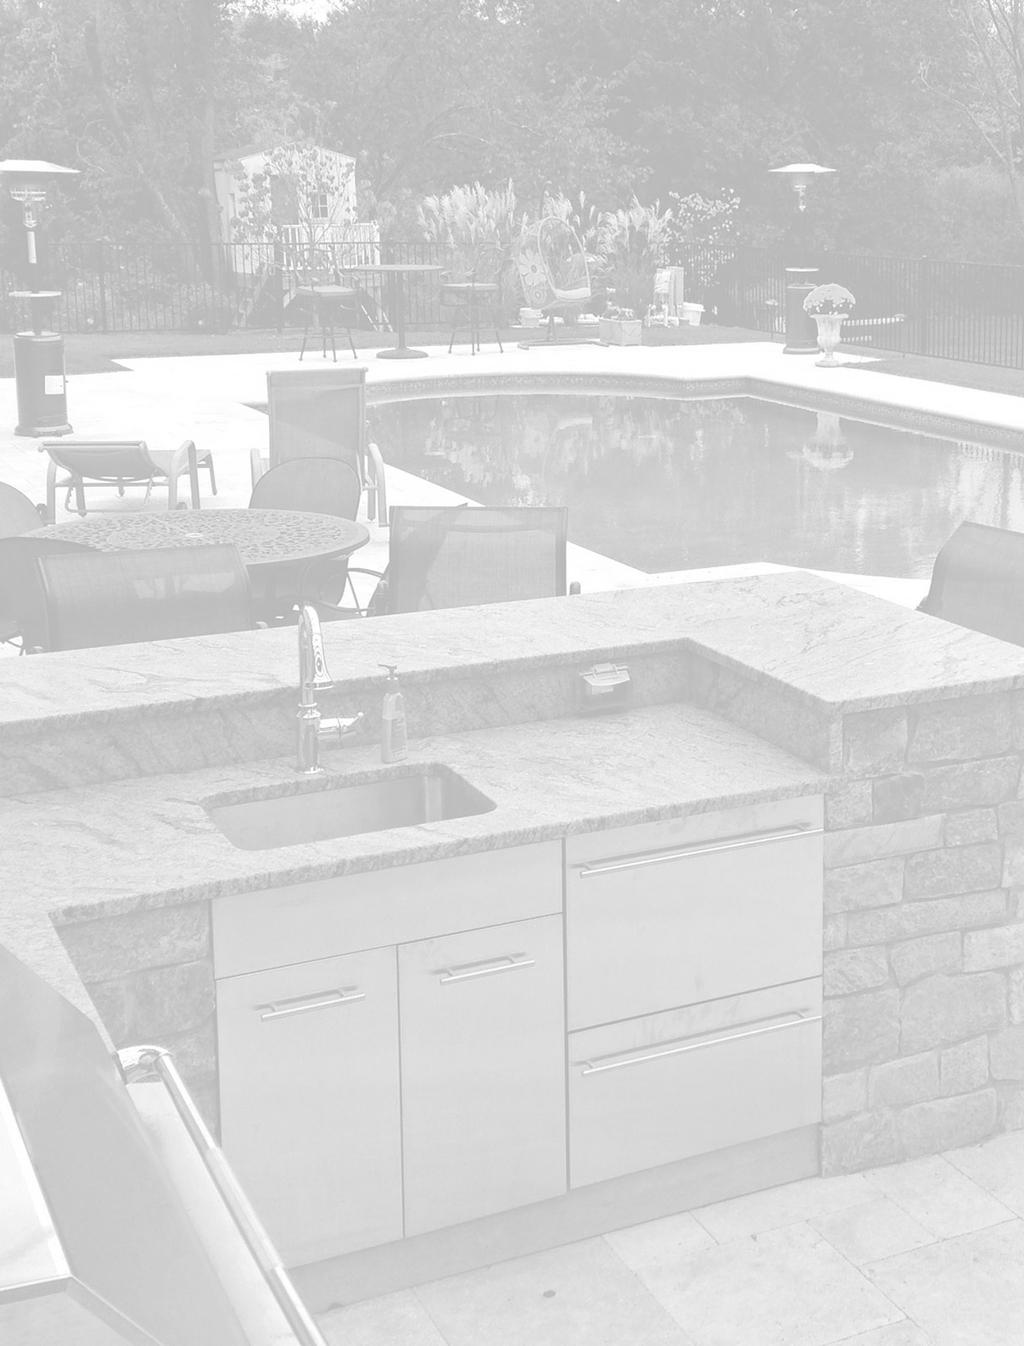 Outdoor Trends The kitchen remains the focal